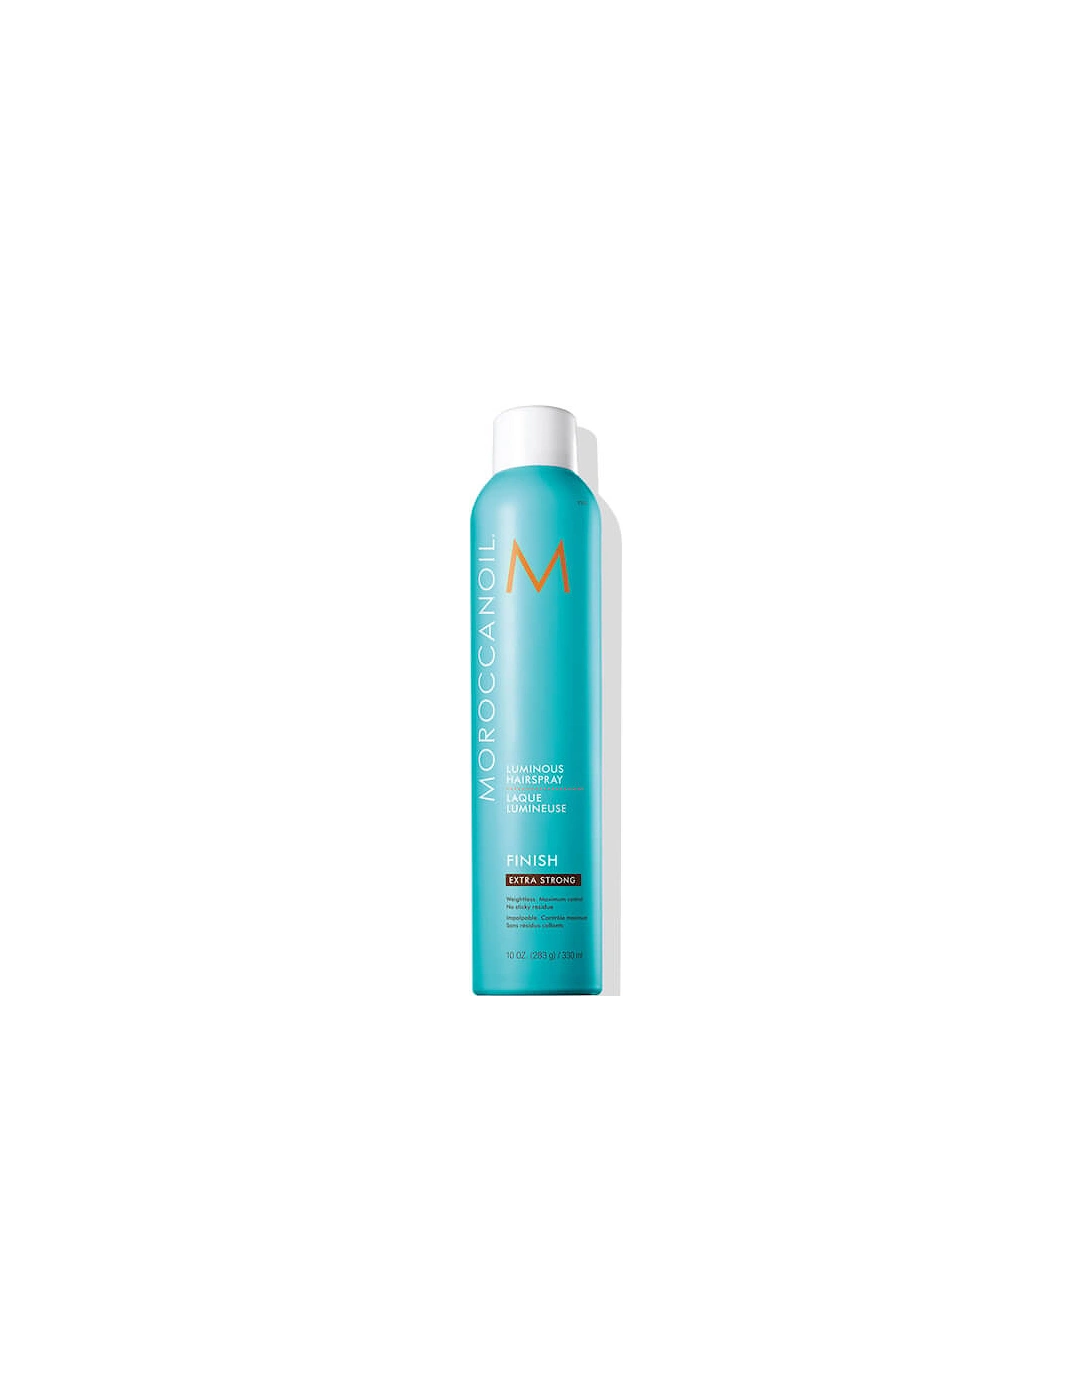 Moroccanoil Extra Strong Hairspray 330ml - Moroccanoil, 2 of 1